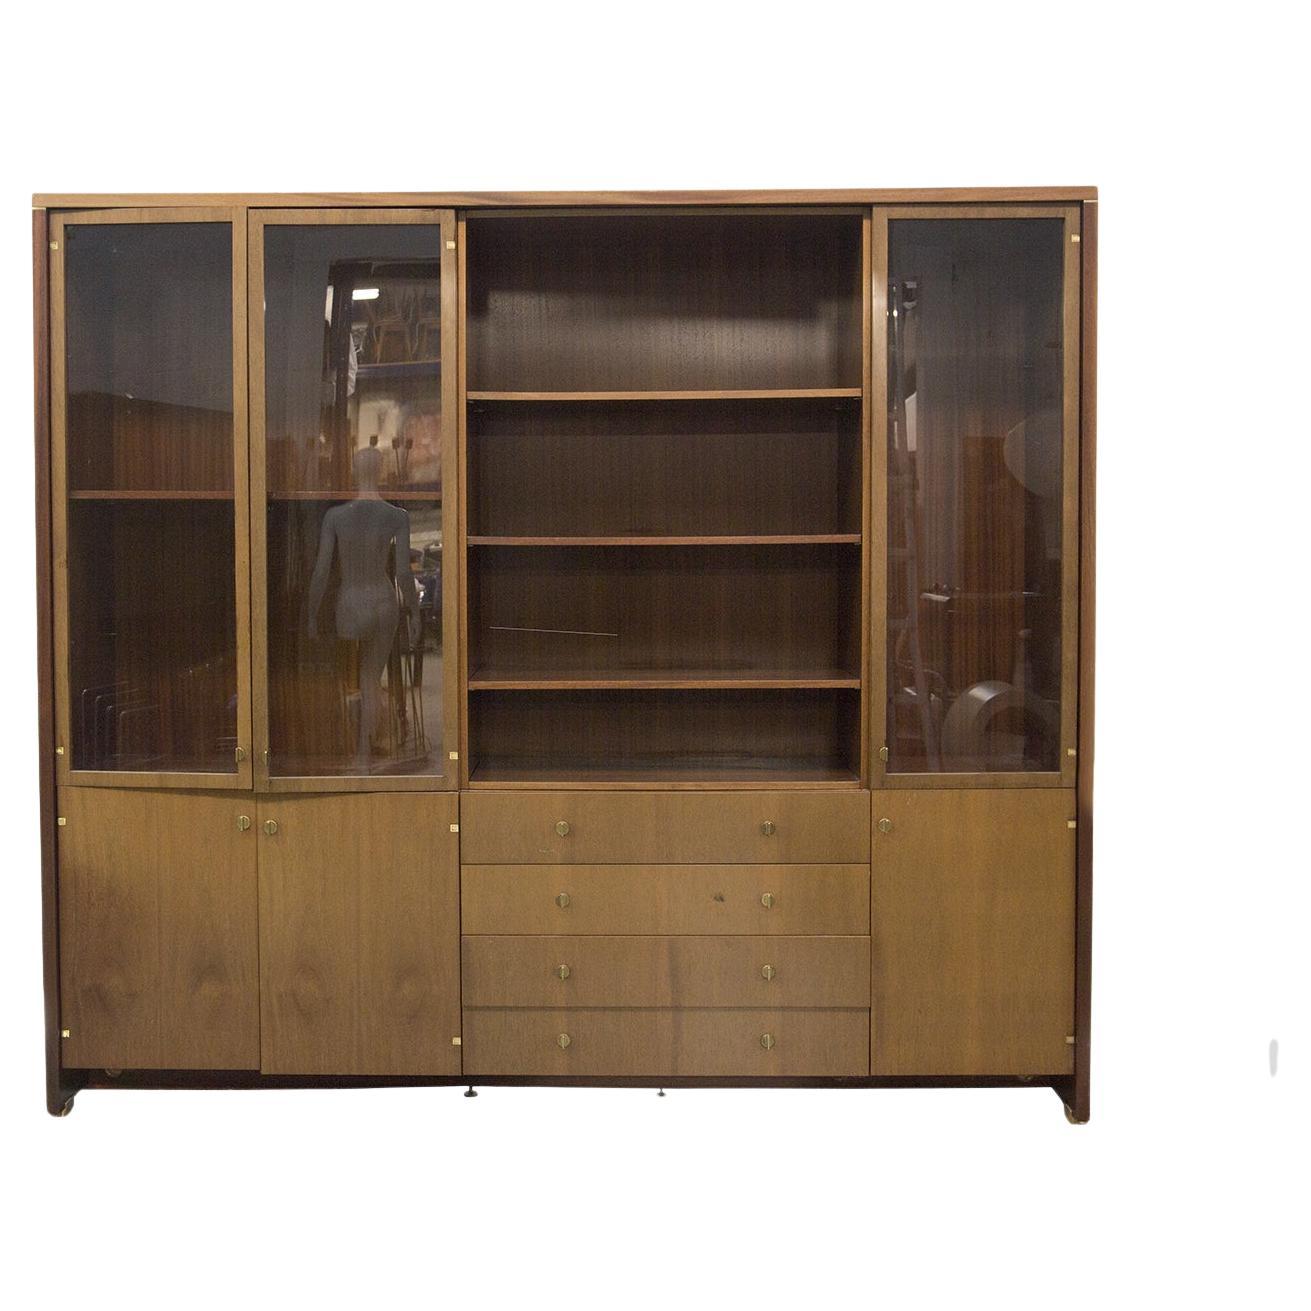 Pierre Balmain Vintage Bookcase in Wood and Glass